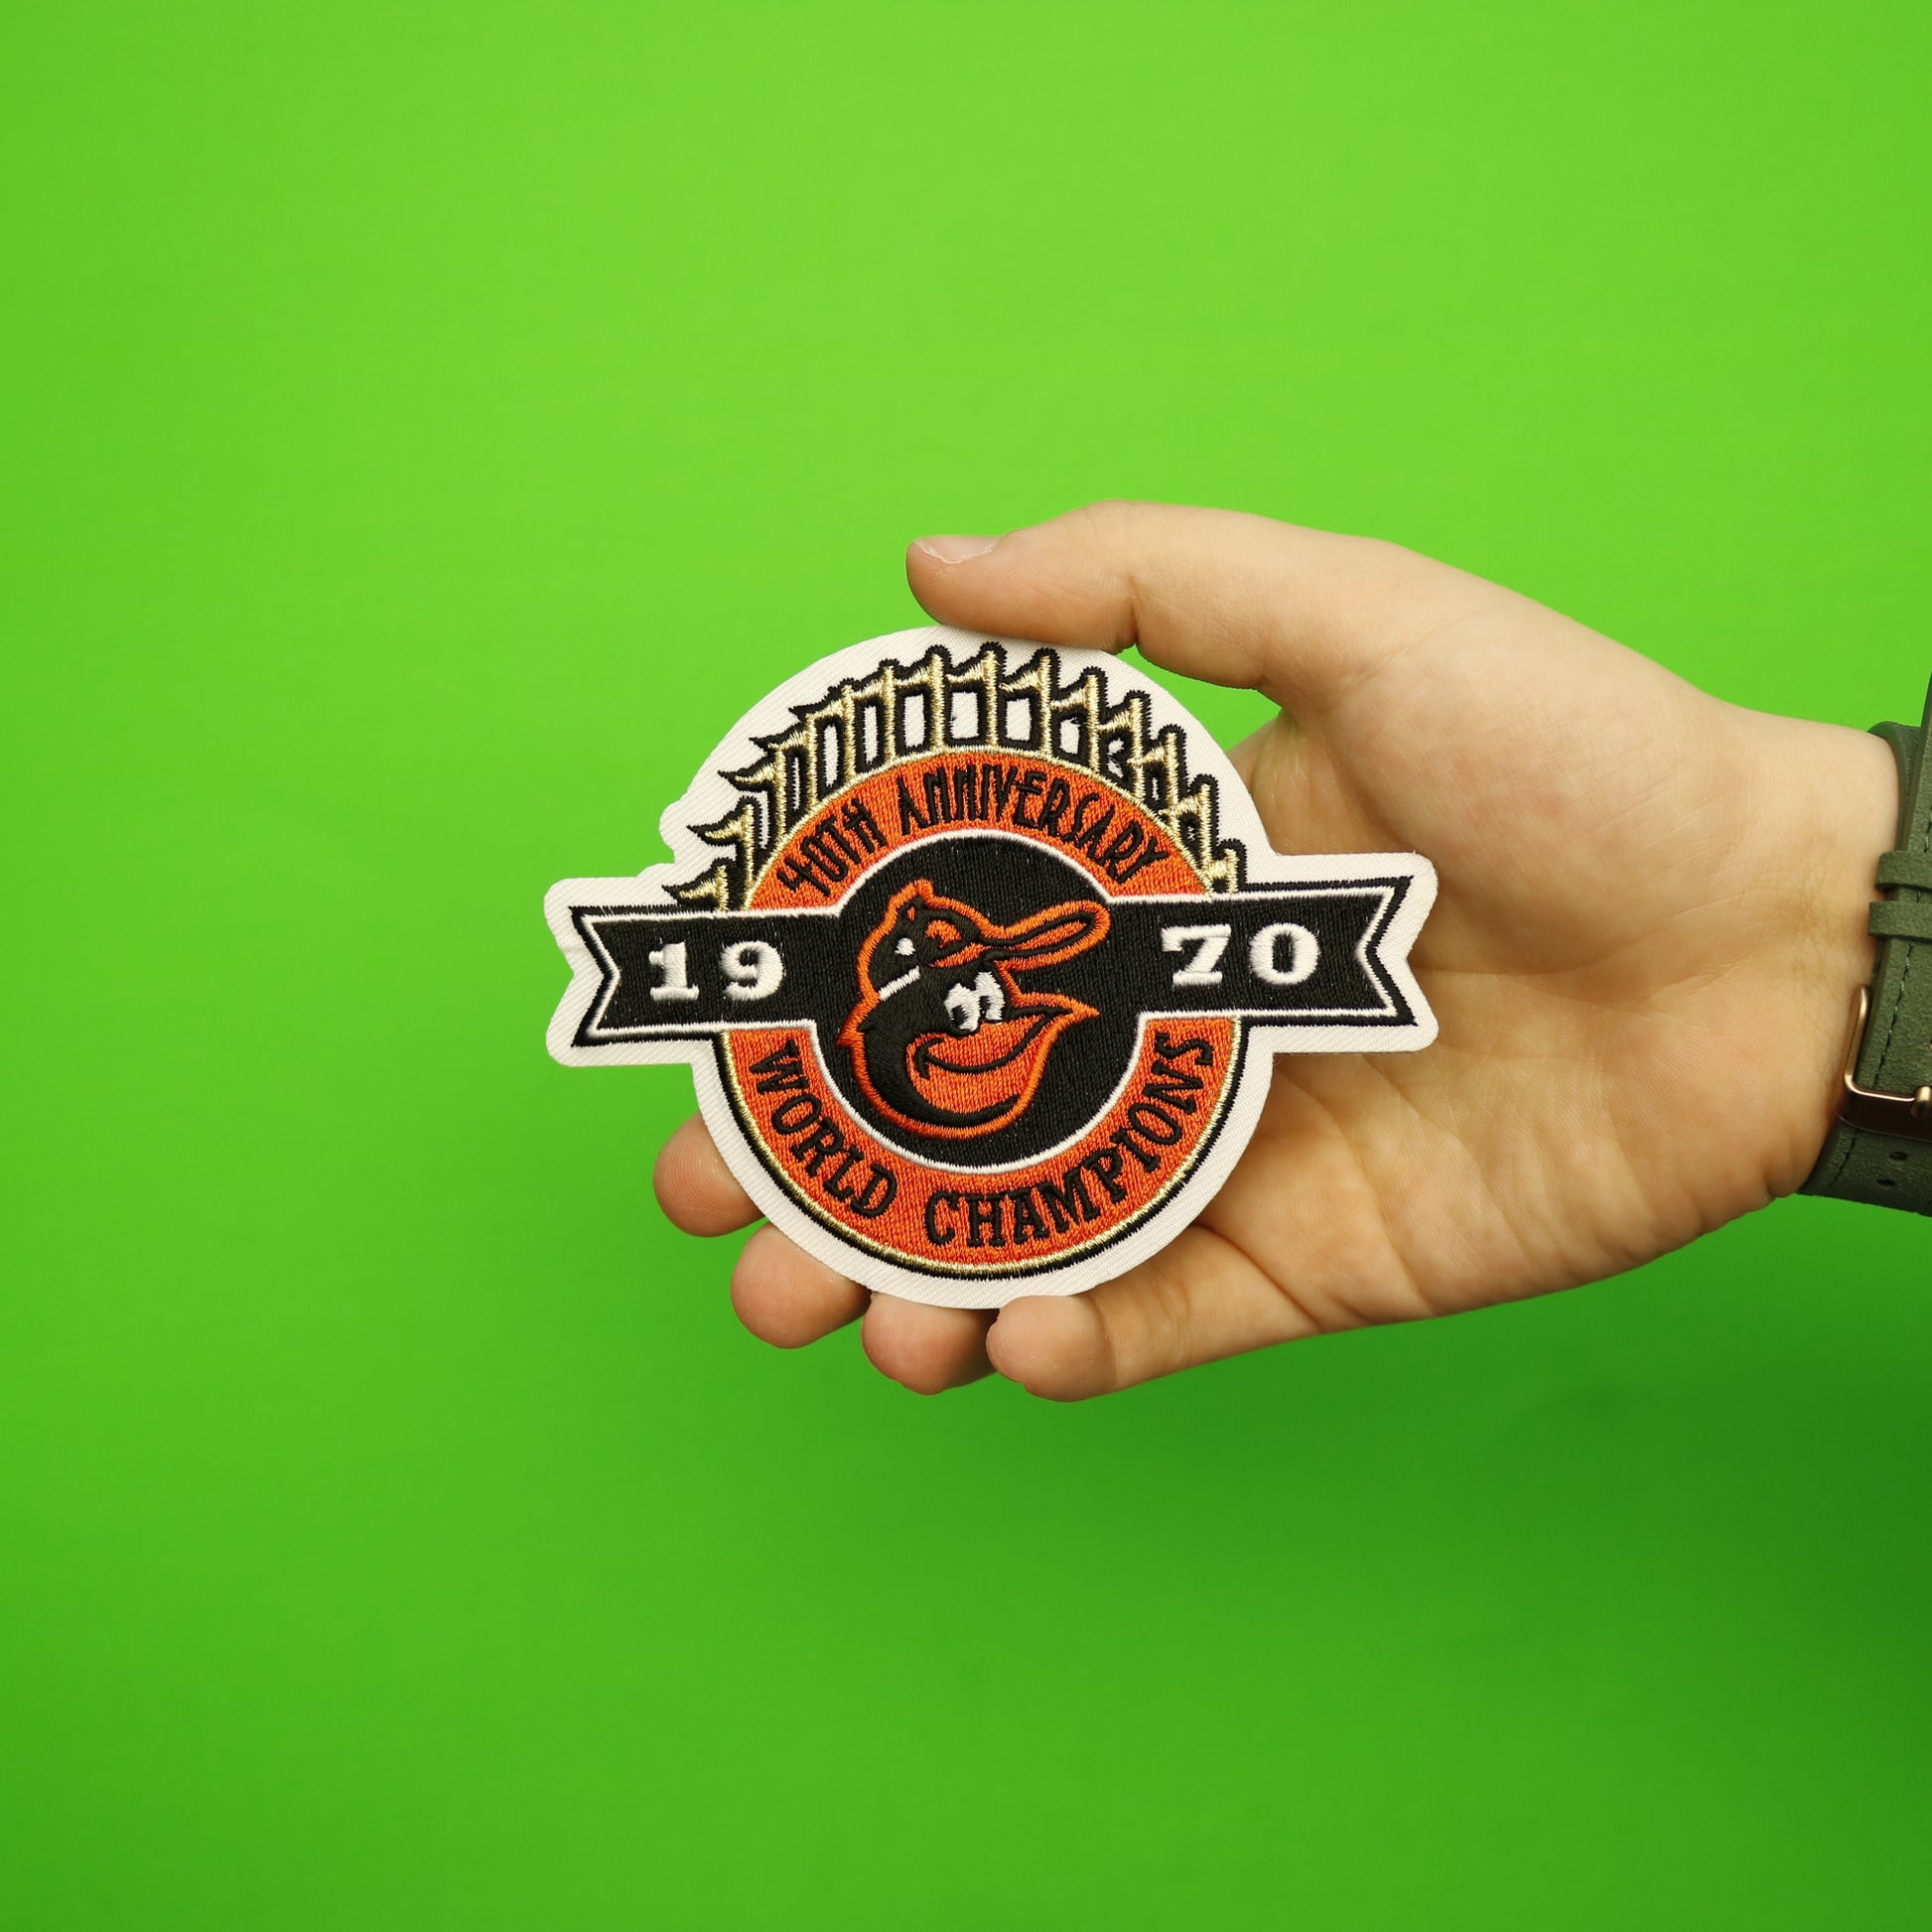 1970 World Champions 40th Anniversary Baltimore Orioles Jersey Patch 